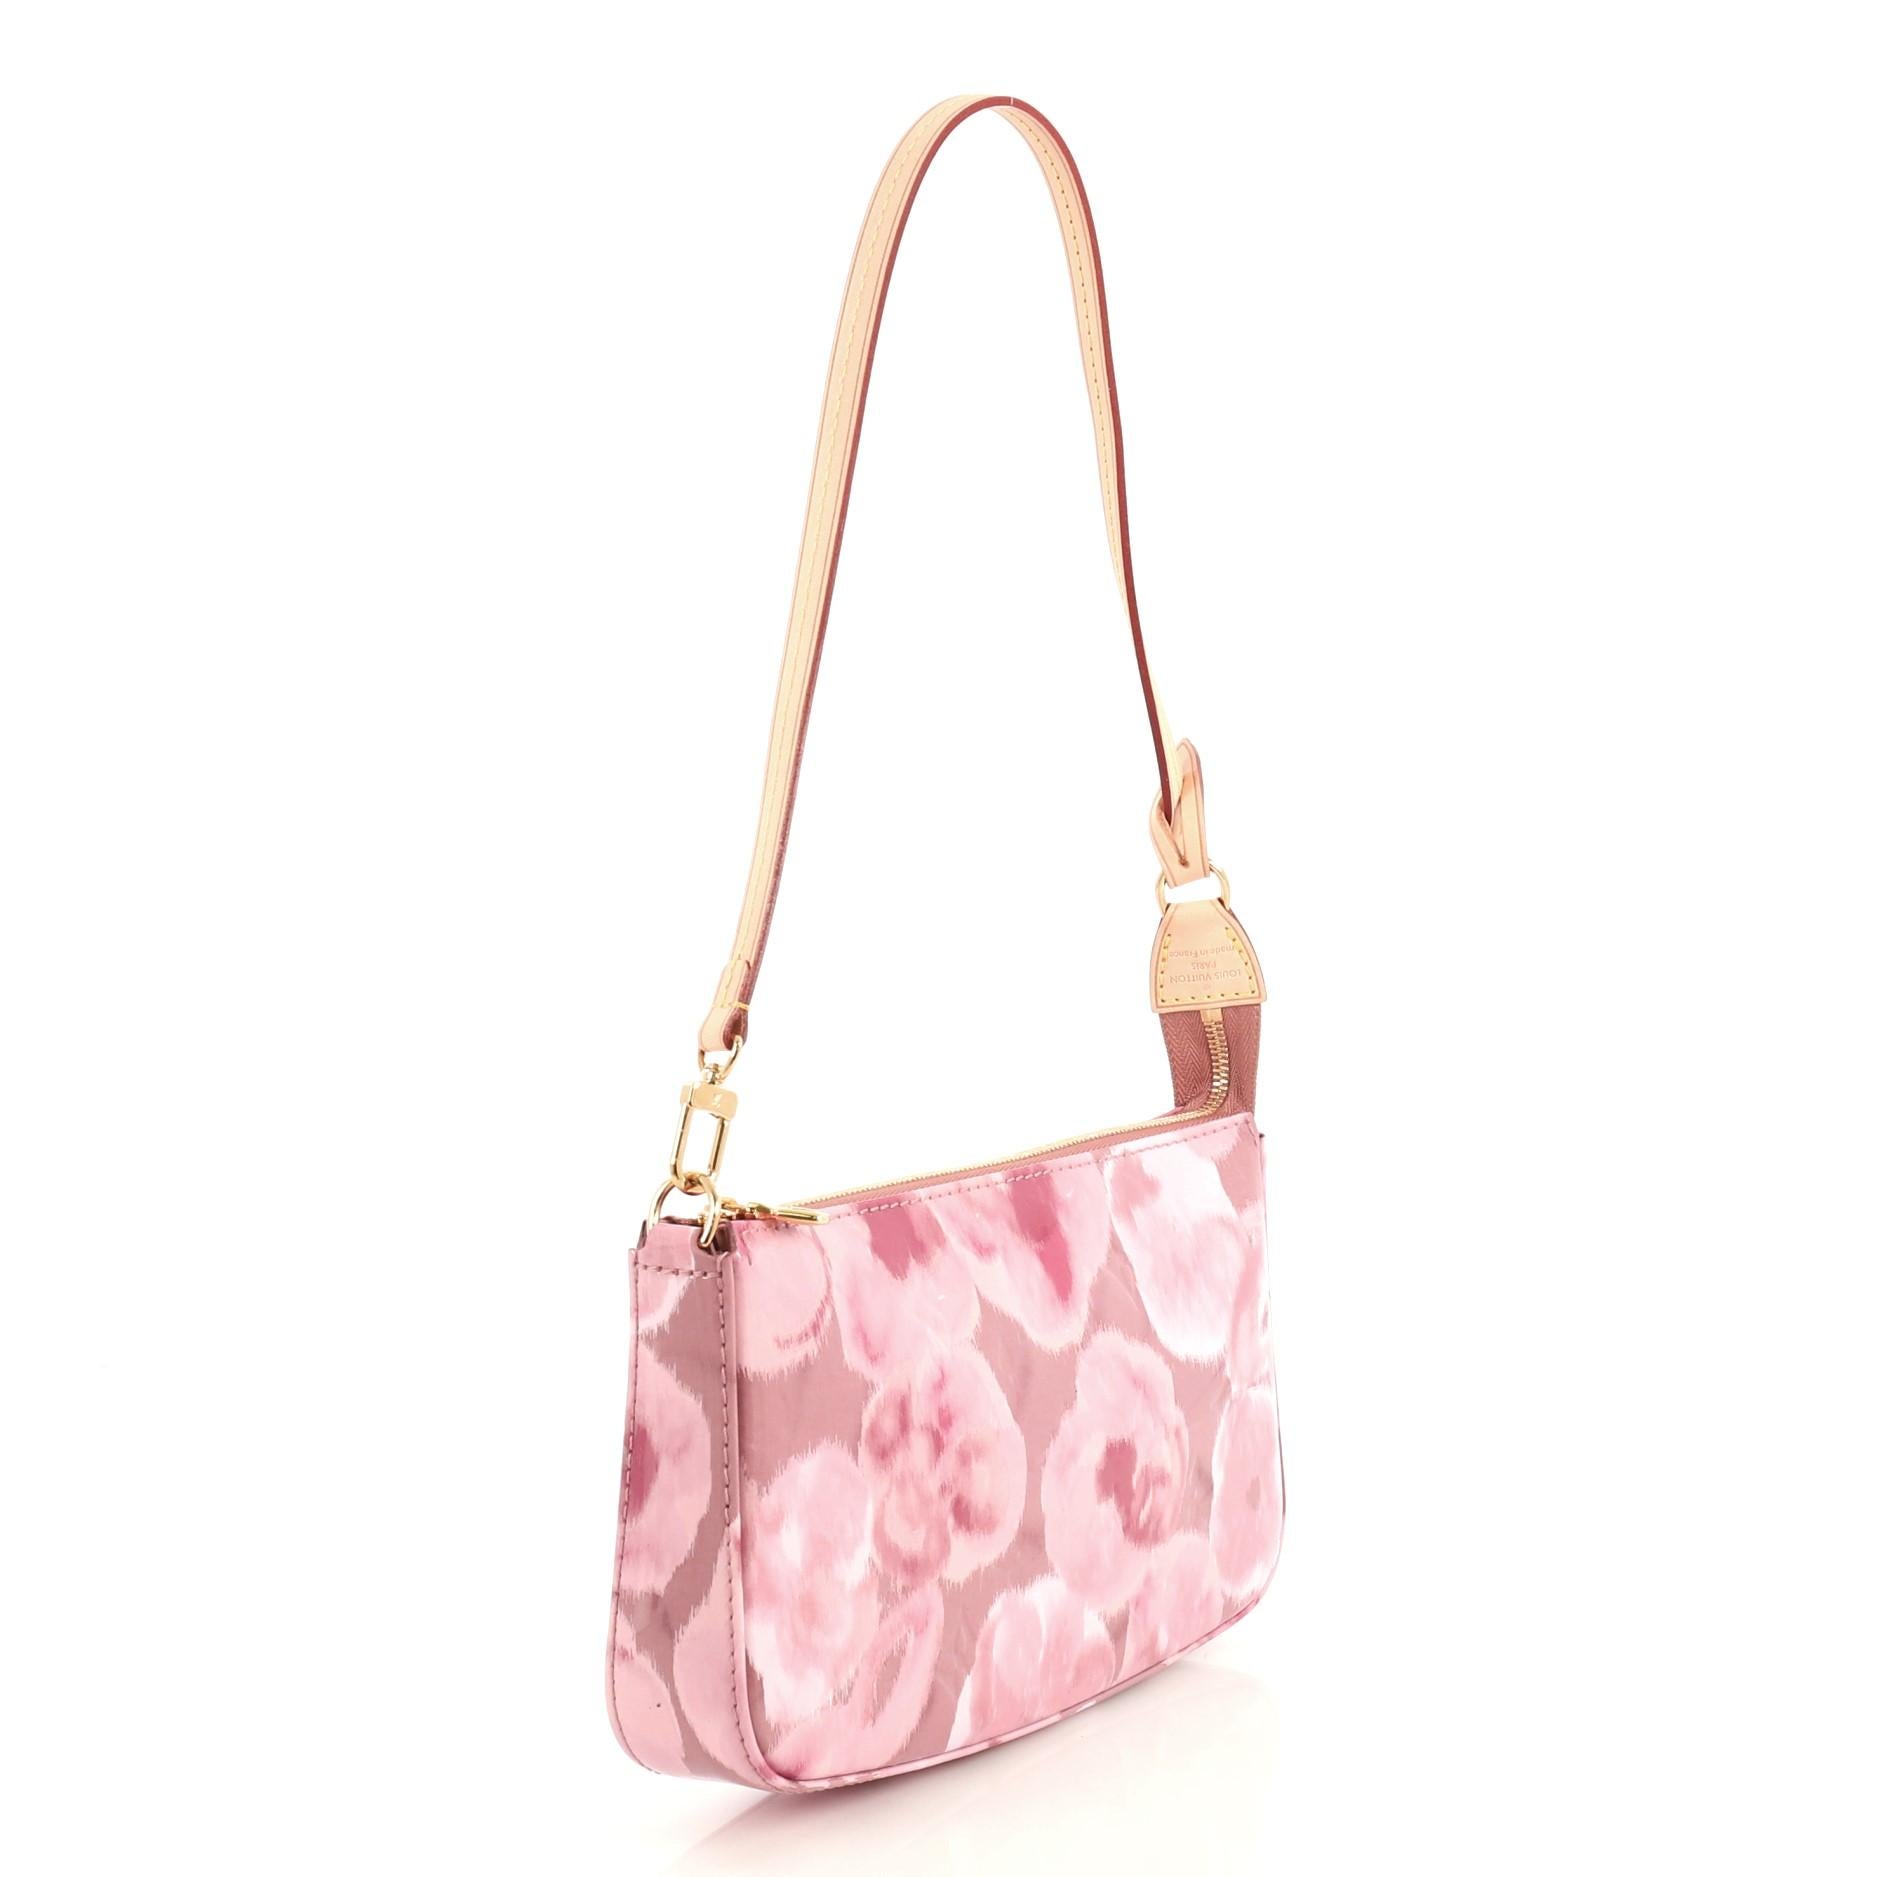 This Louis Vuitton Pochette Accessoires NM Limited Edition Monogram Vernis Ikat, crafted from pink printed monogram vernis ikat, features a single loop shoulder strap and gold-tone hardware. Its zip closure opens to a pink fabric interior with side